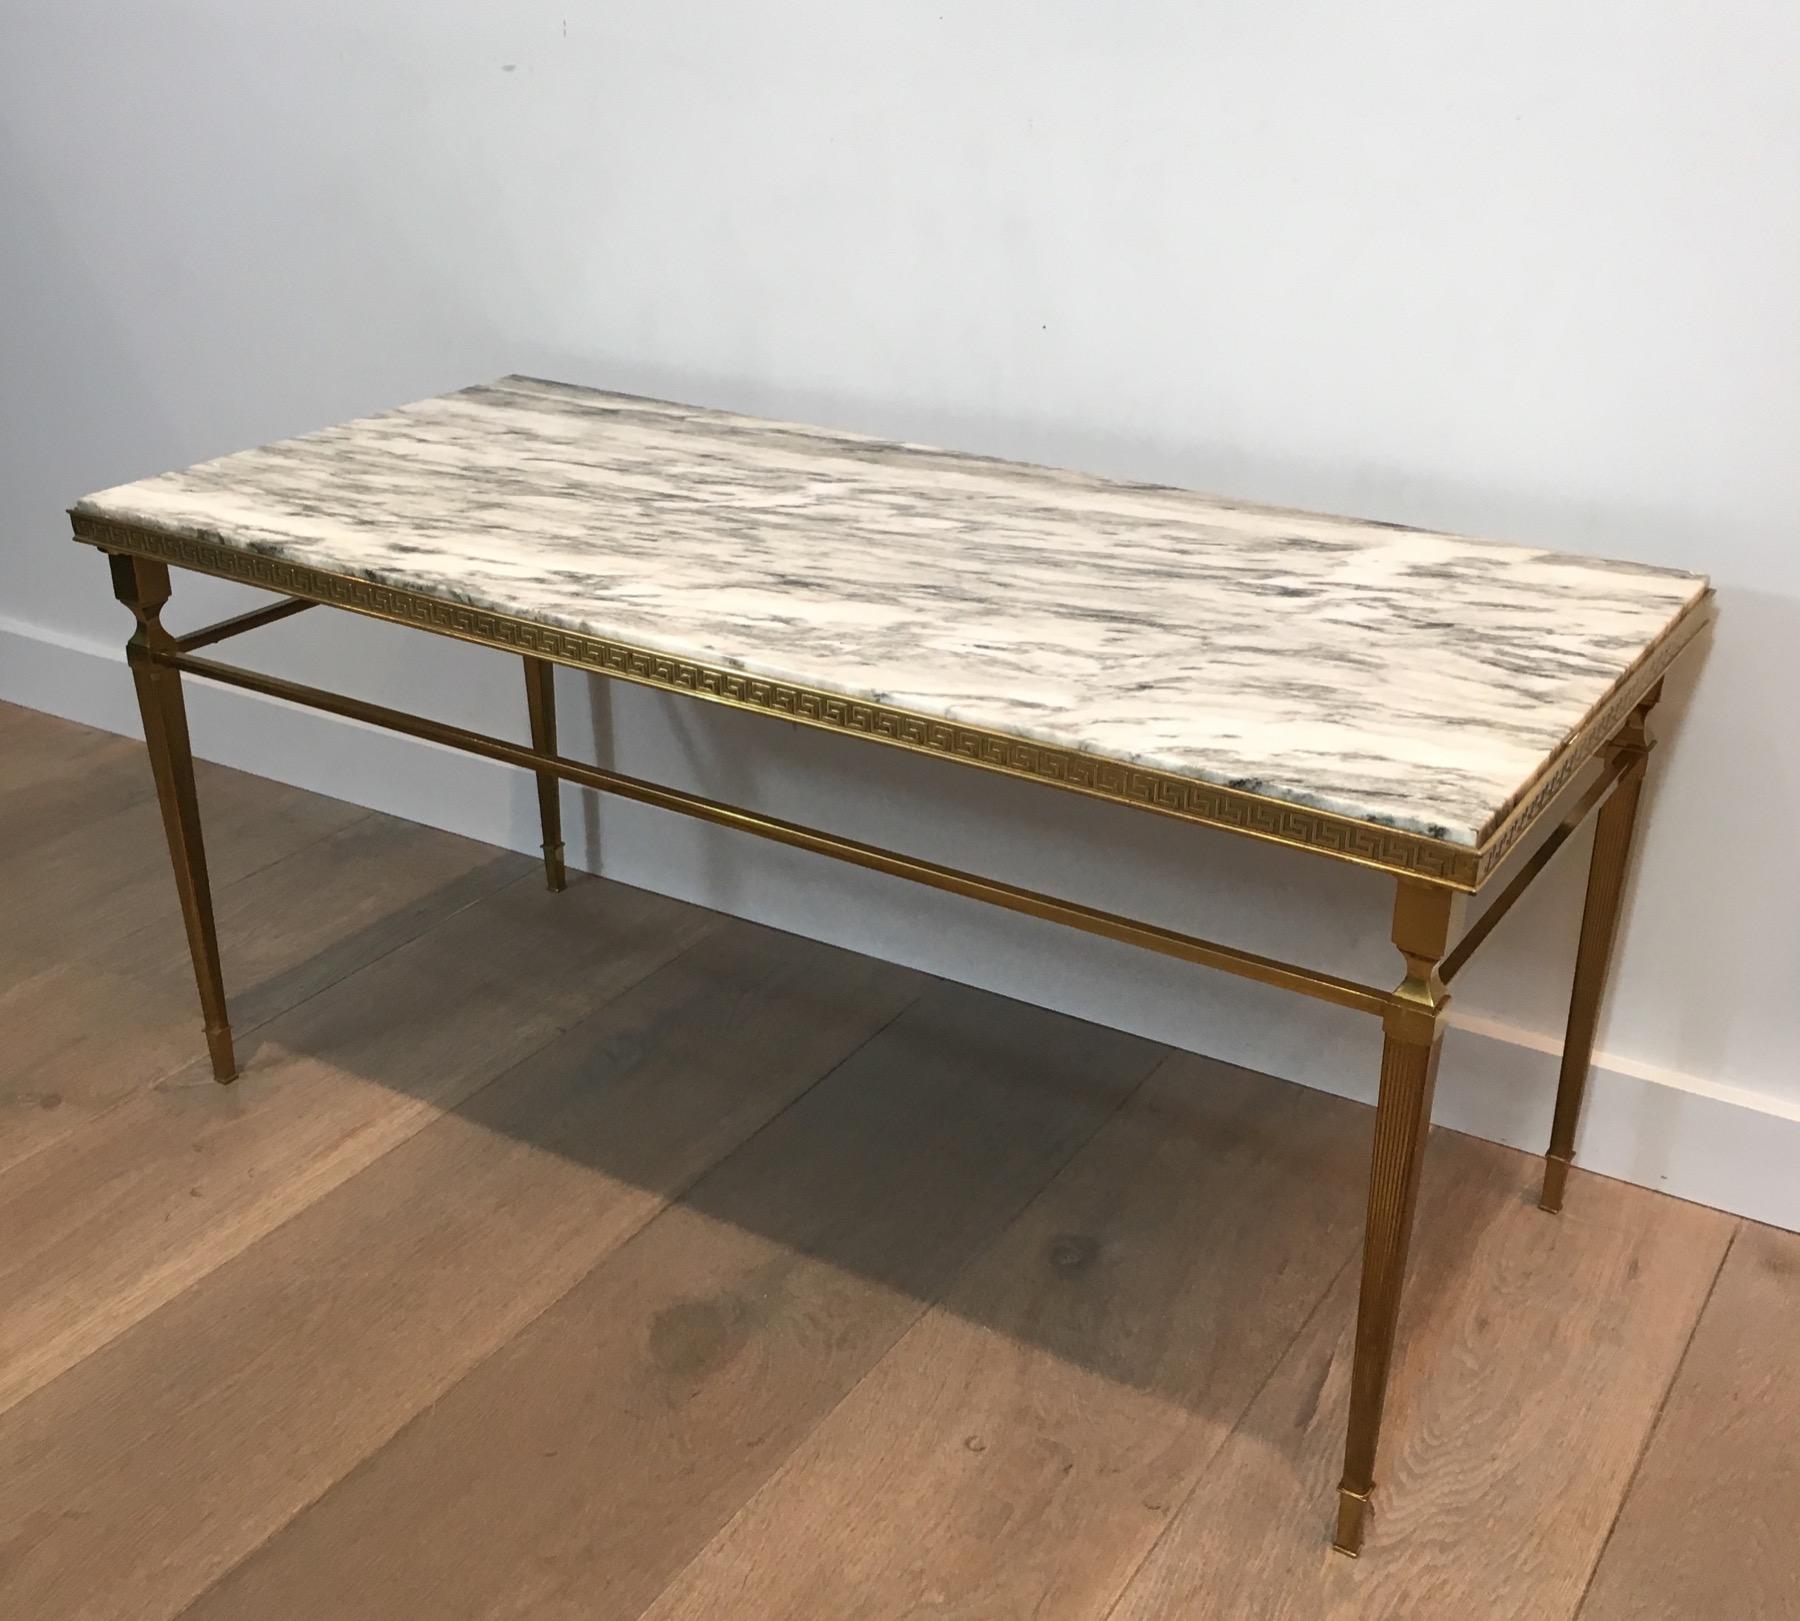 French Attributed to Maison Jansen, Neoclassical Brass Coffee Table with Marble Top